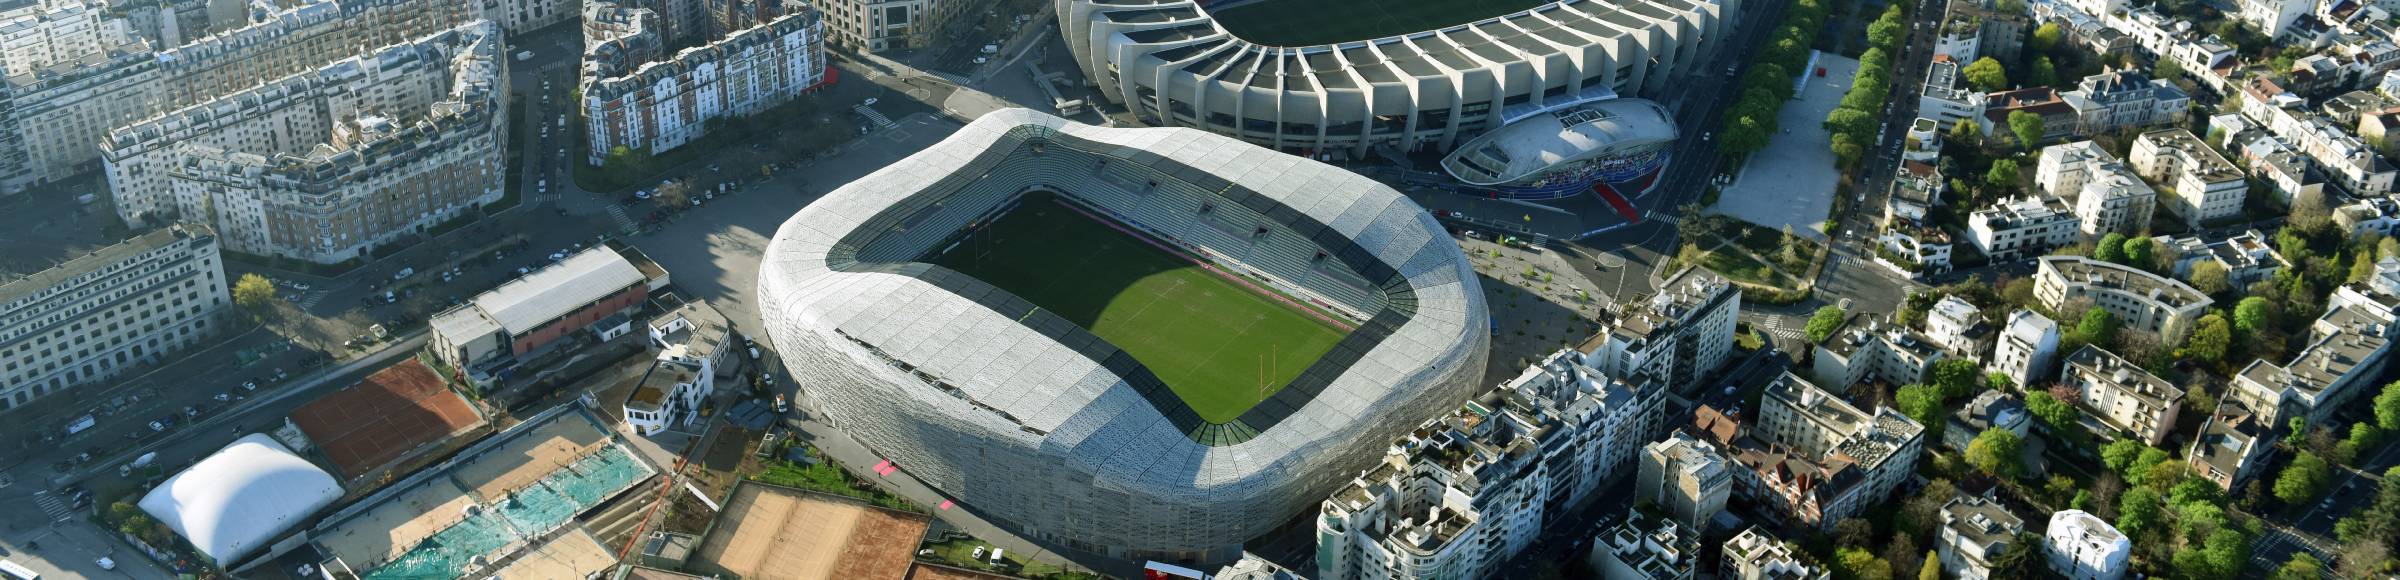 Sports facility grounds of the Arena stadium Stade Jean Bouin on Avenue du General Sarrail in Paris in Ile-de-France, France